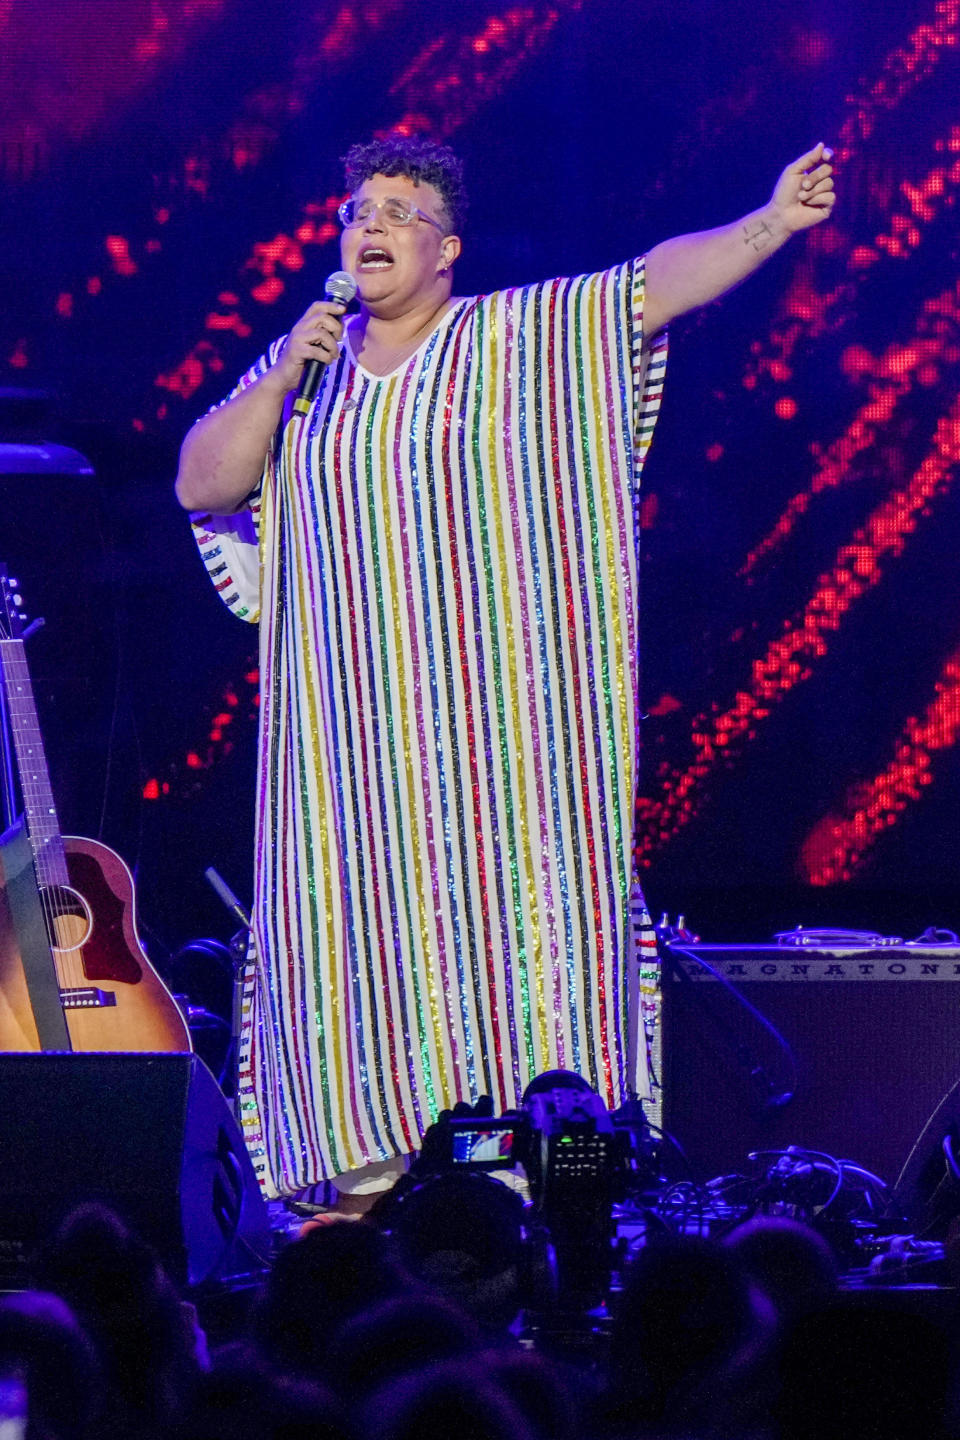 Brittany Howard performs at "Love Rising," a benefit concert for the Tennessee Equality Project, Inclusion Tennessee, OUTMemphis and The Tennessee Pride Chamber, on Monday, March 20, 2023, at the Bridgestone Arena in Nashville, Tenn. (Photo by Ed Rode/Invision/AP)